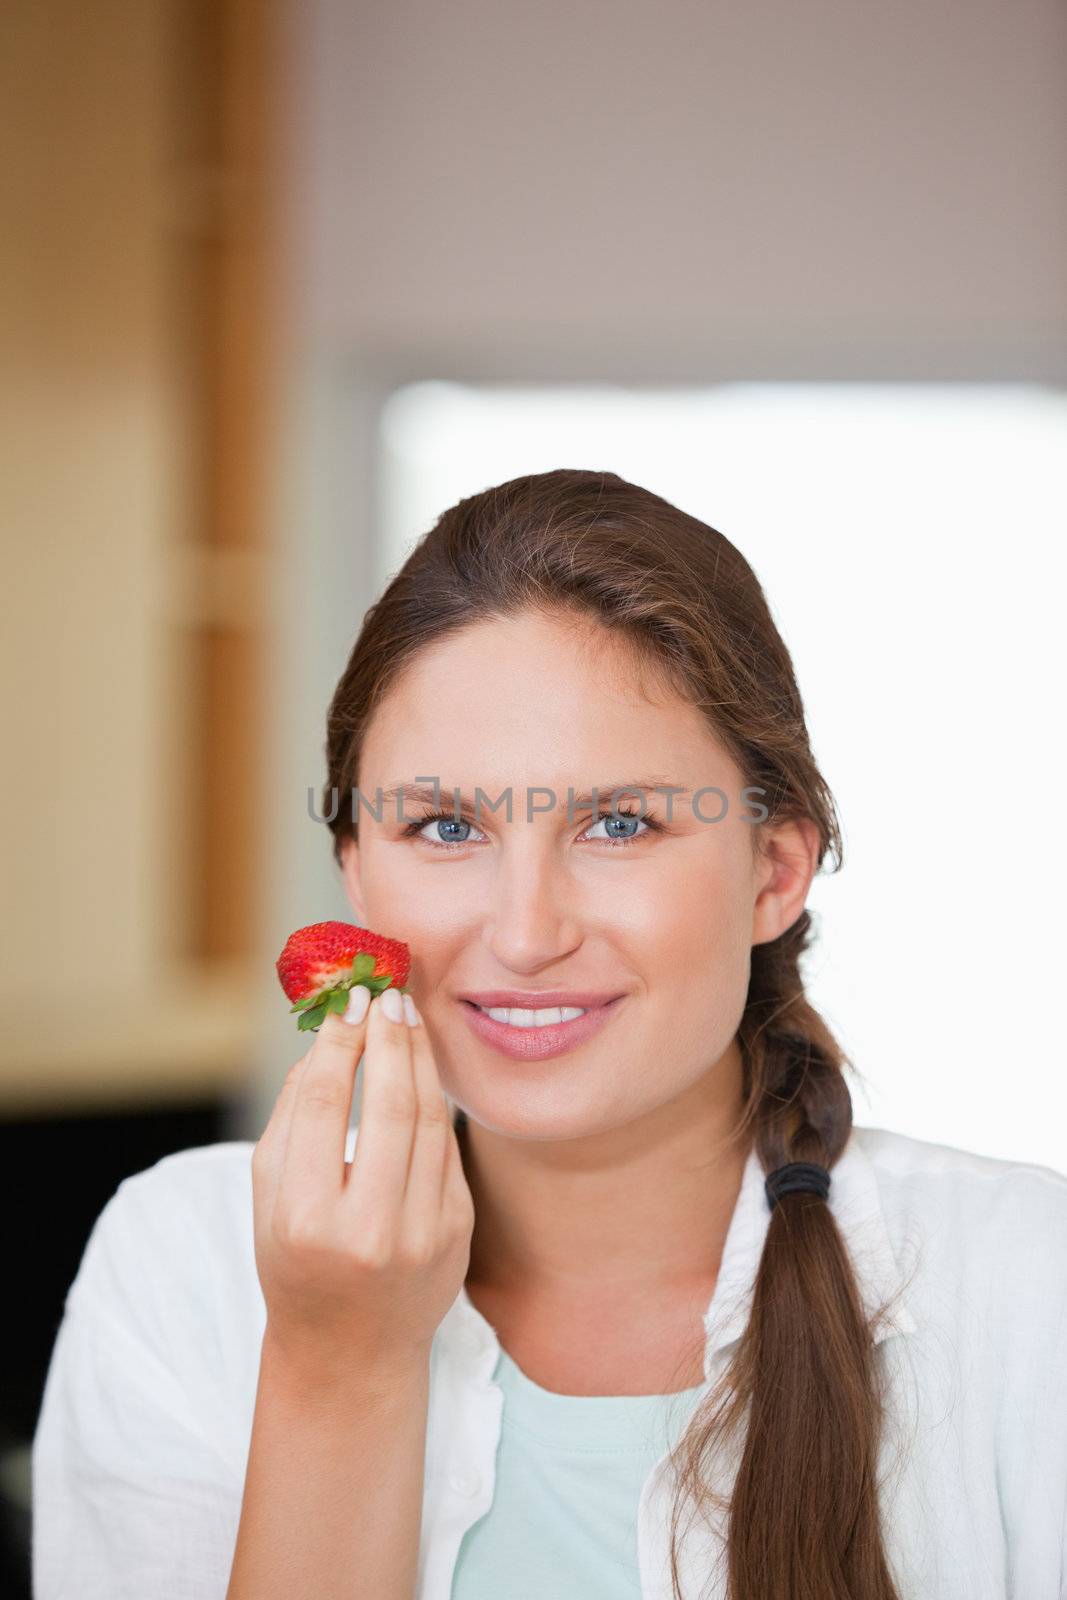 Woman eating a strawberry indoors